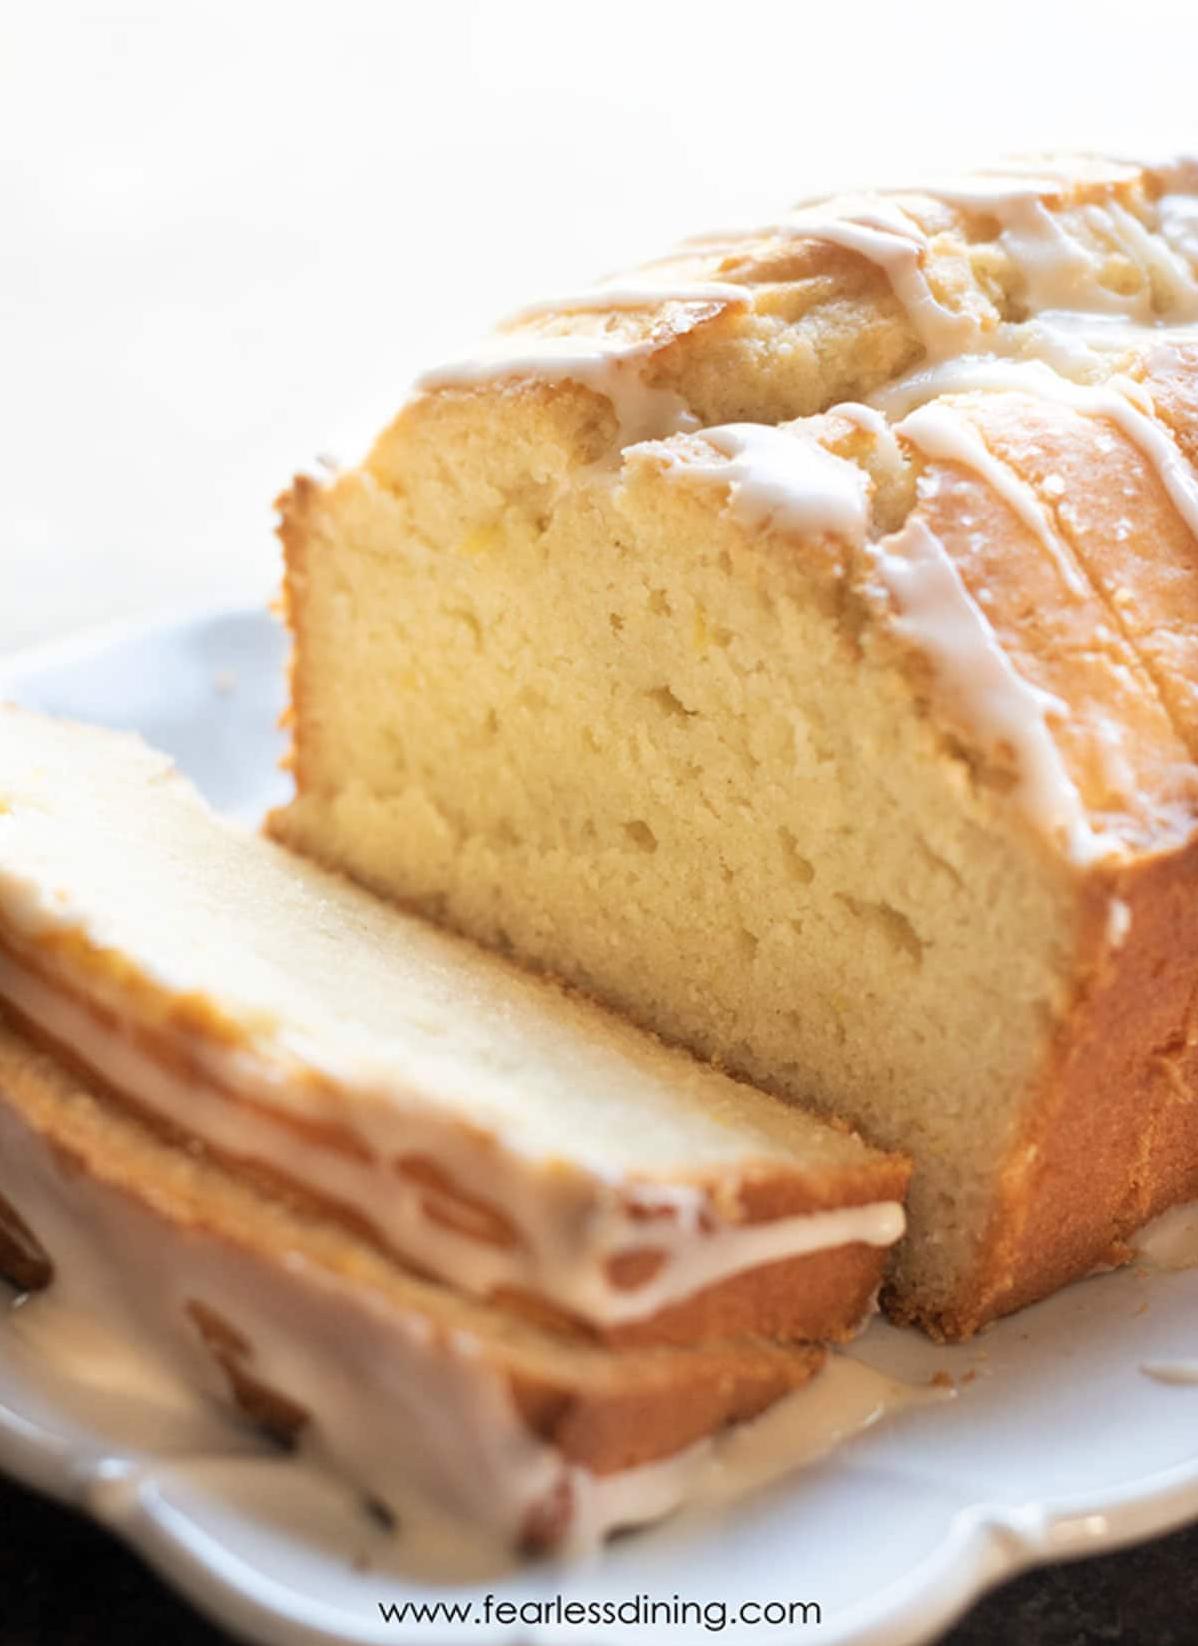  A delicious cake that's perfect for tea-time with friends.